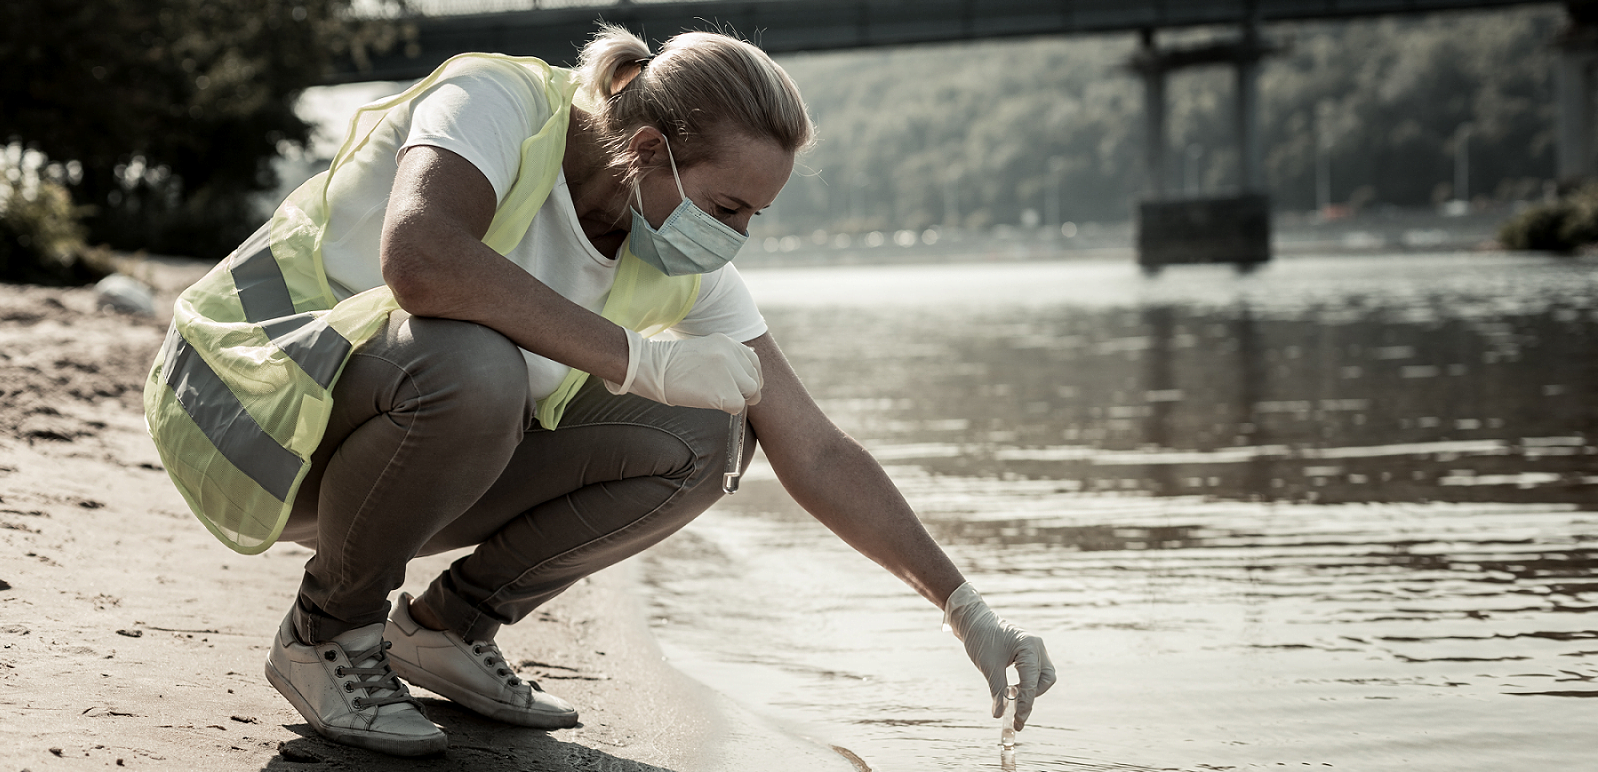 Image of a vulnerable worker - a female lone worker undertaking a water inspection at a riverside.